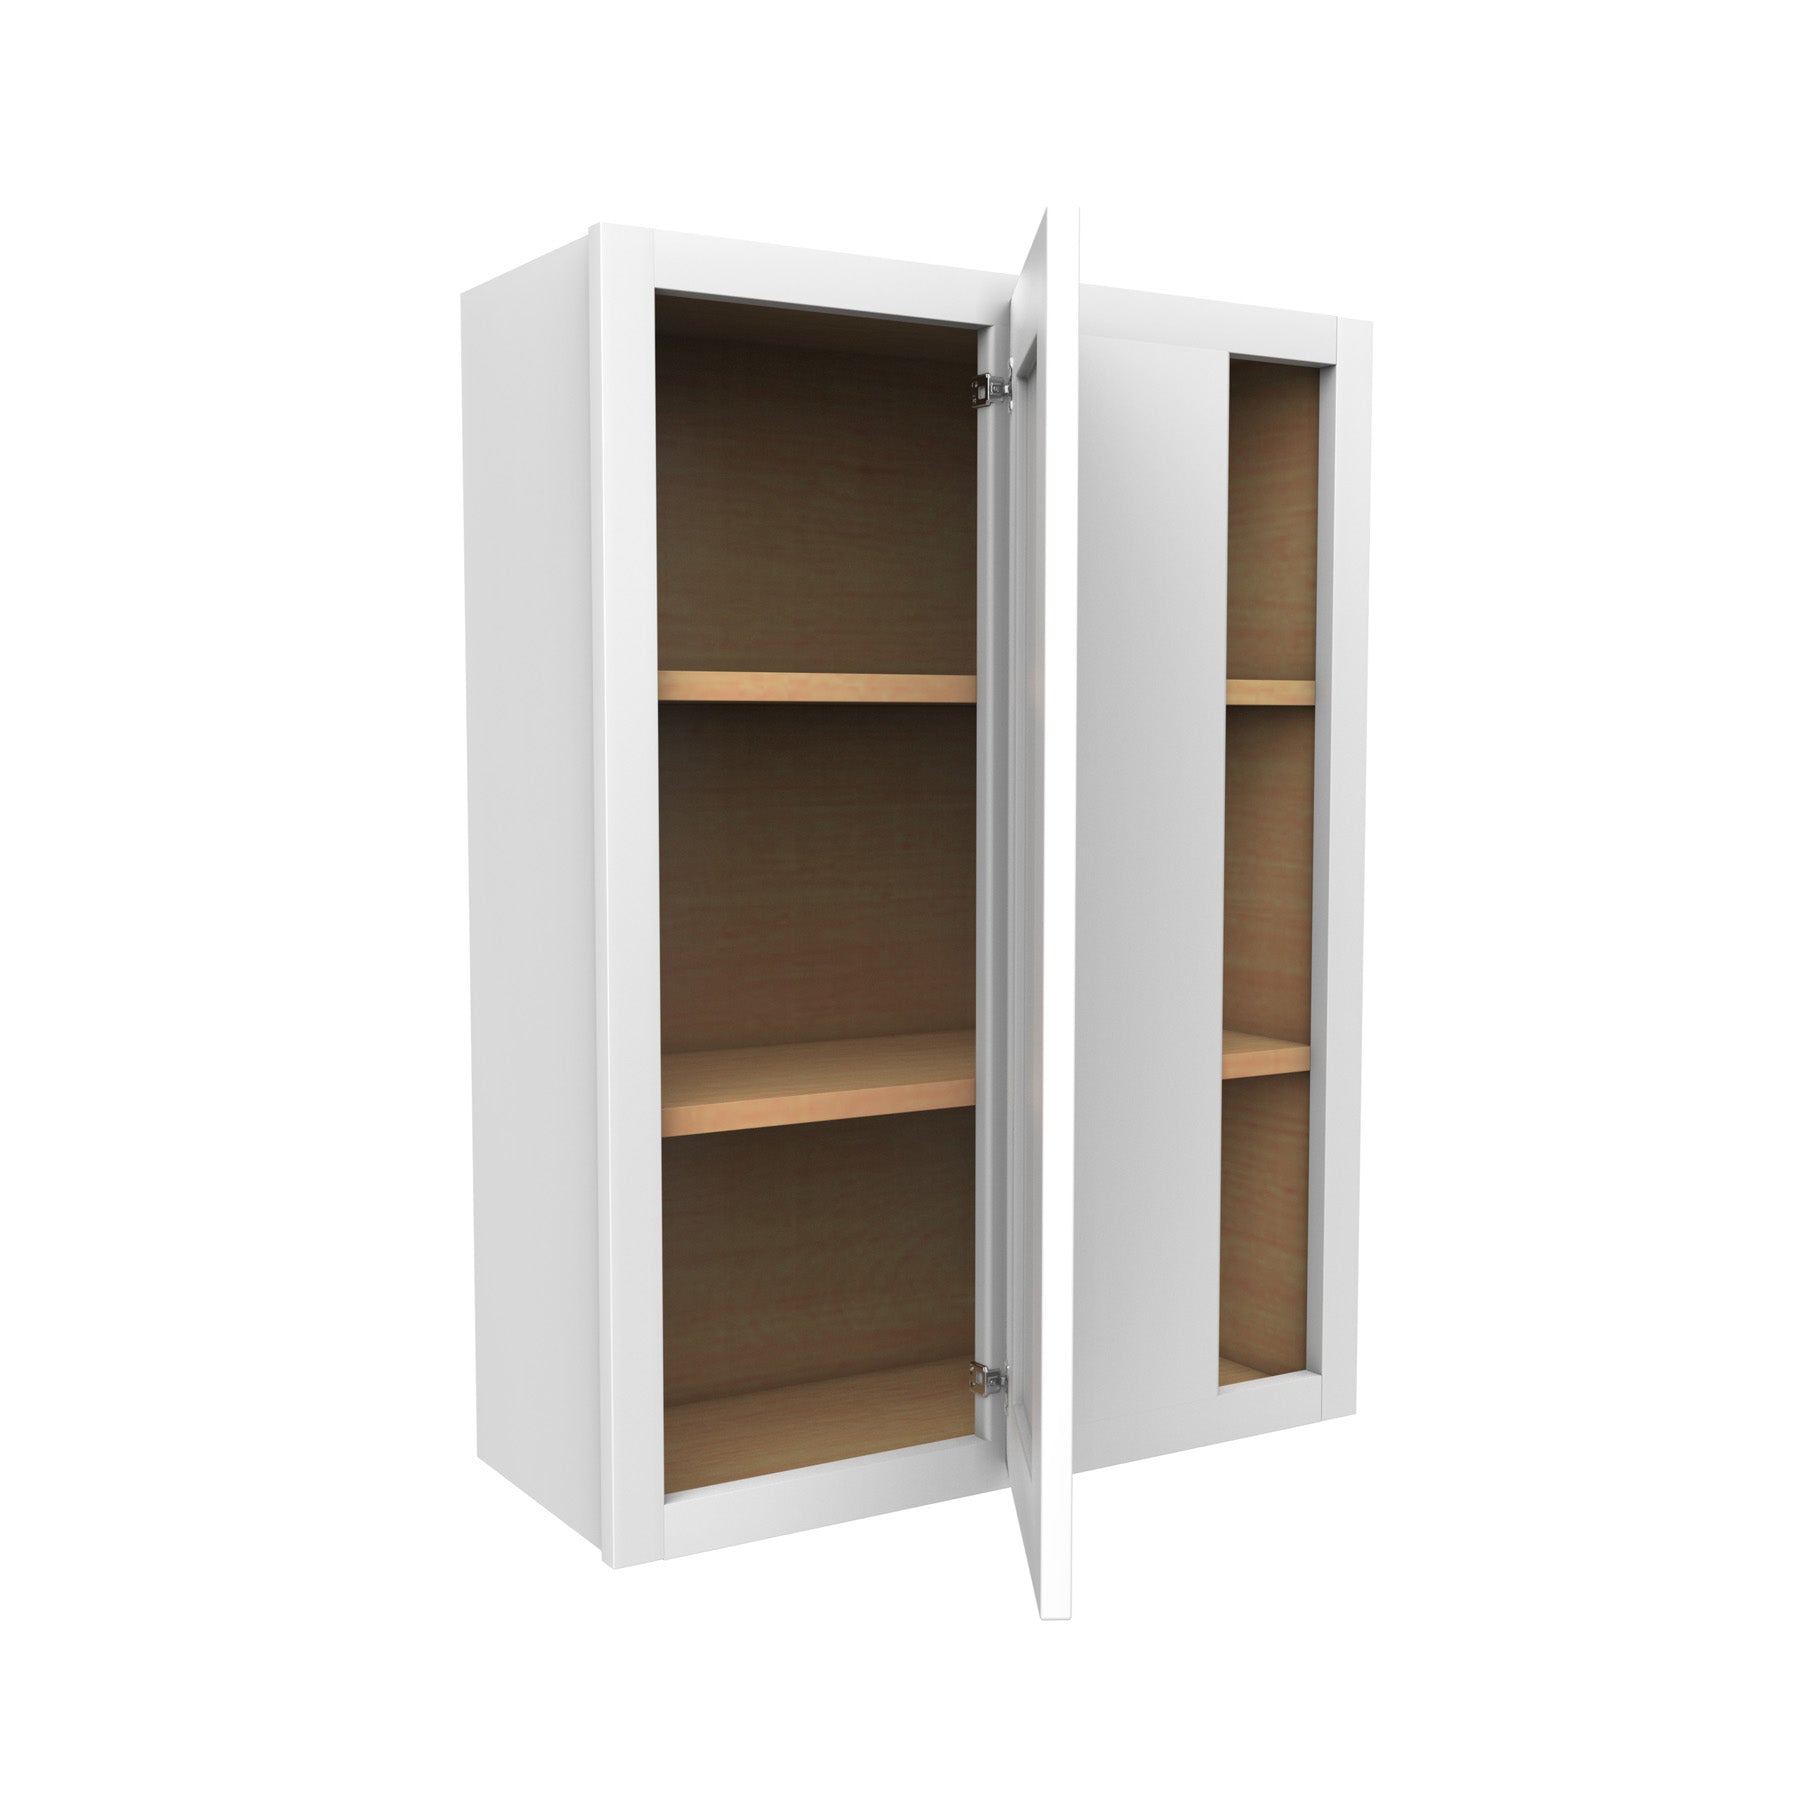 Luxor White - Blind Wall Cabinet | 27"W x 36"H x 12"D